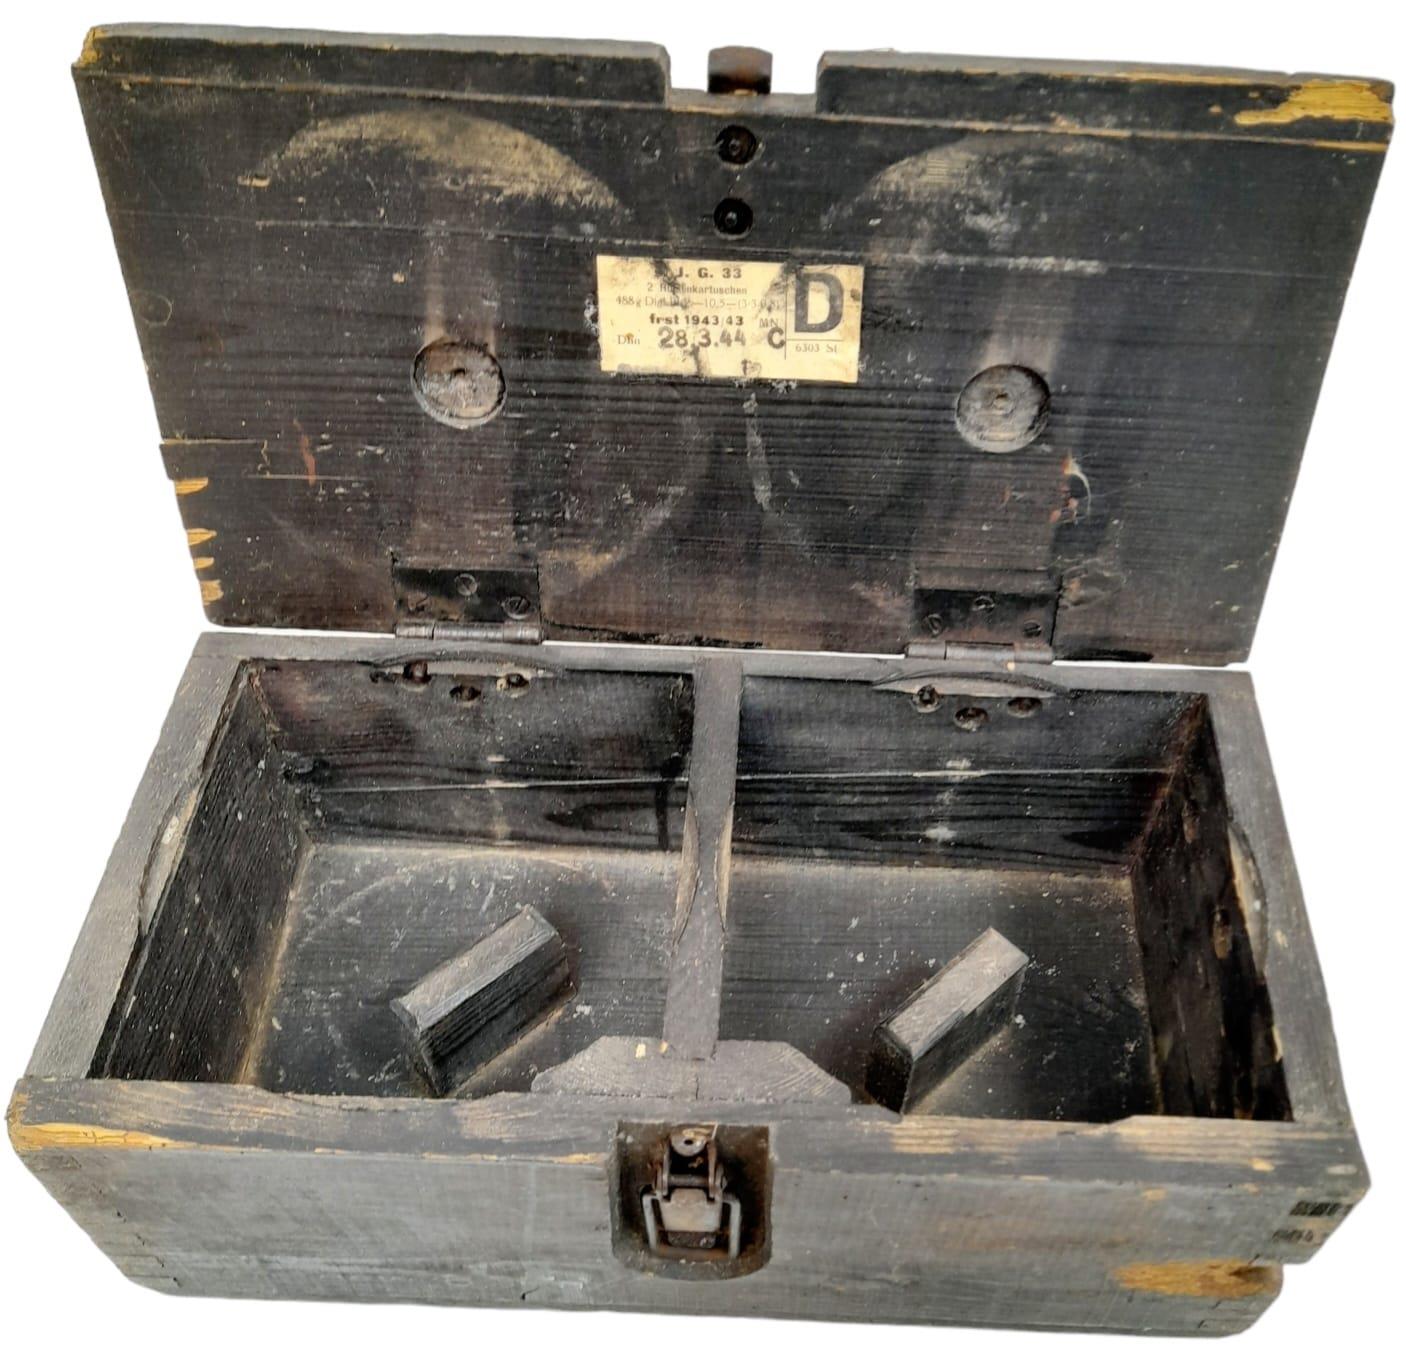 WW2 German 15cm Sig 33 Cartridge Box with original labels, stencils, and internals. - Image 3 of 15